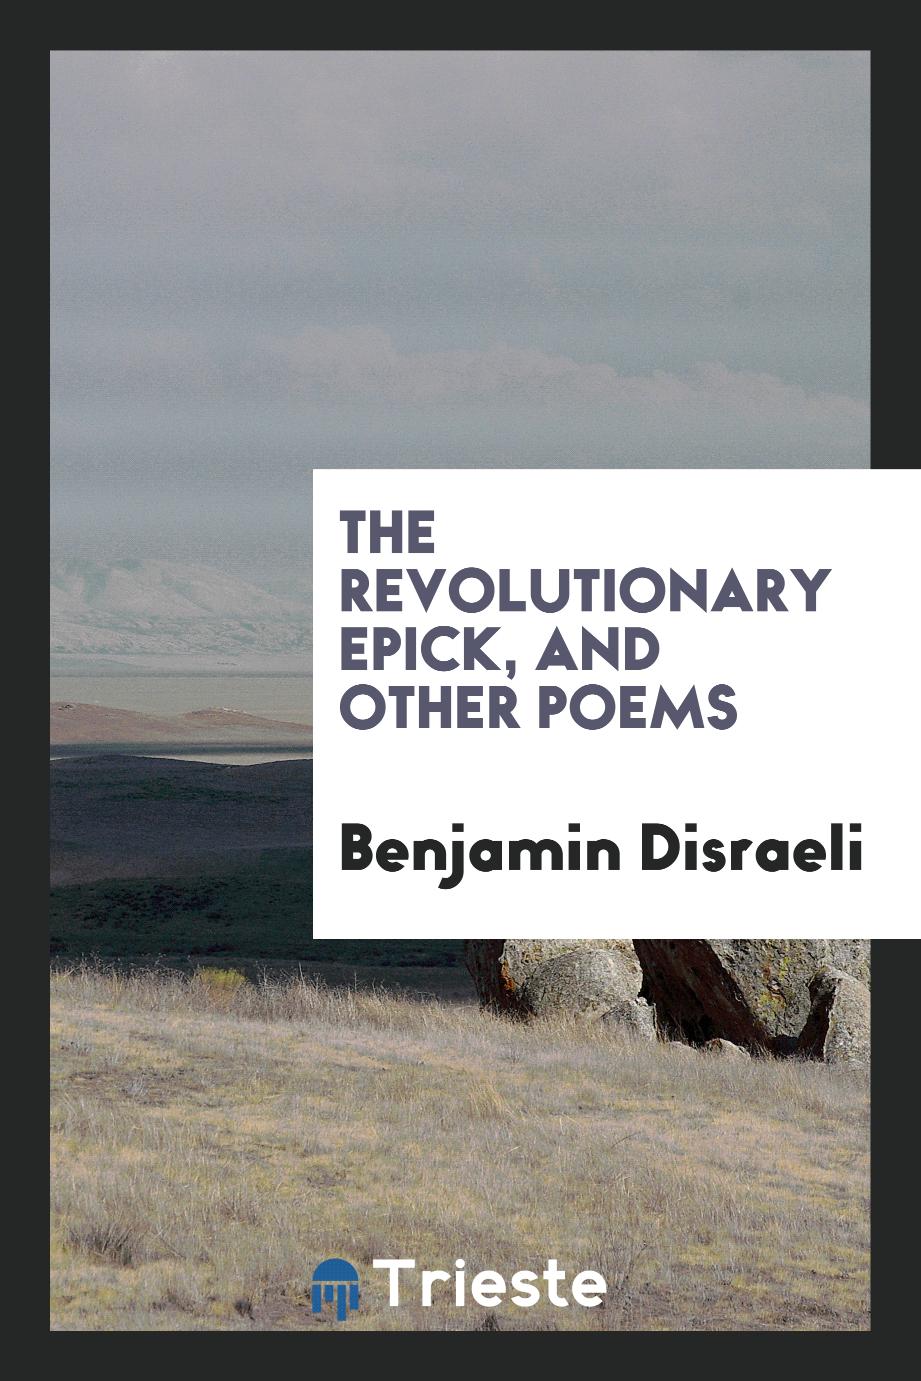 The revolutionary epick, and other poems